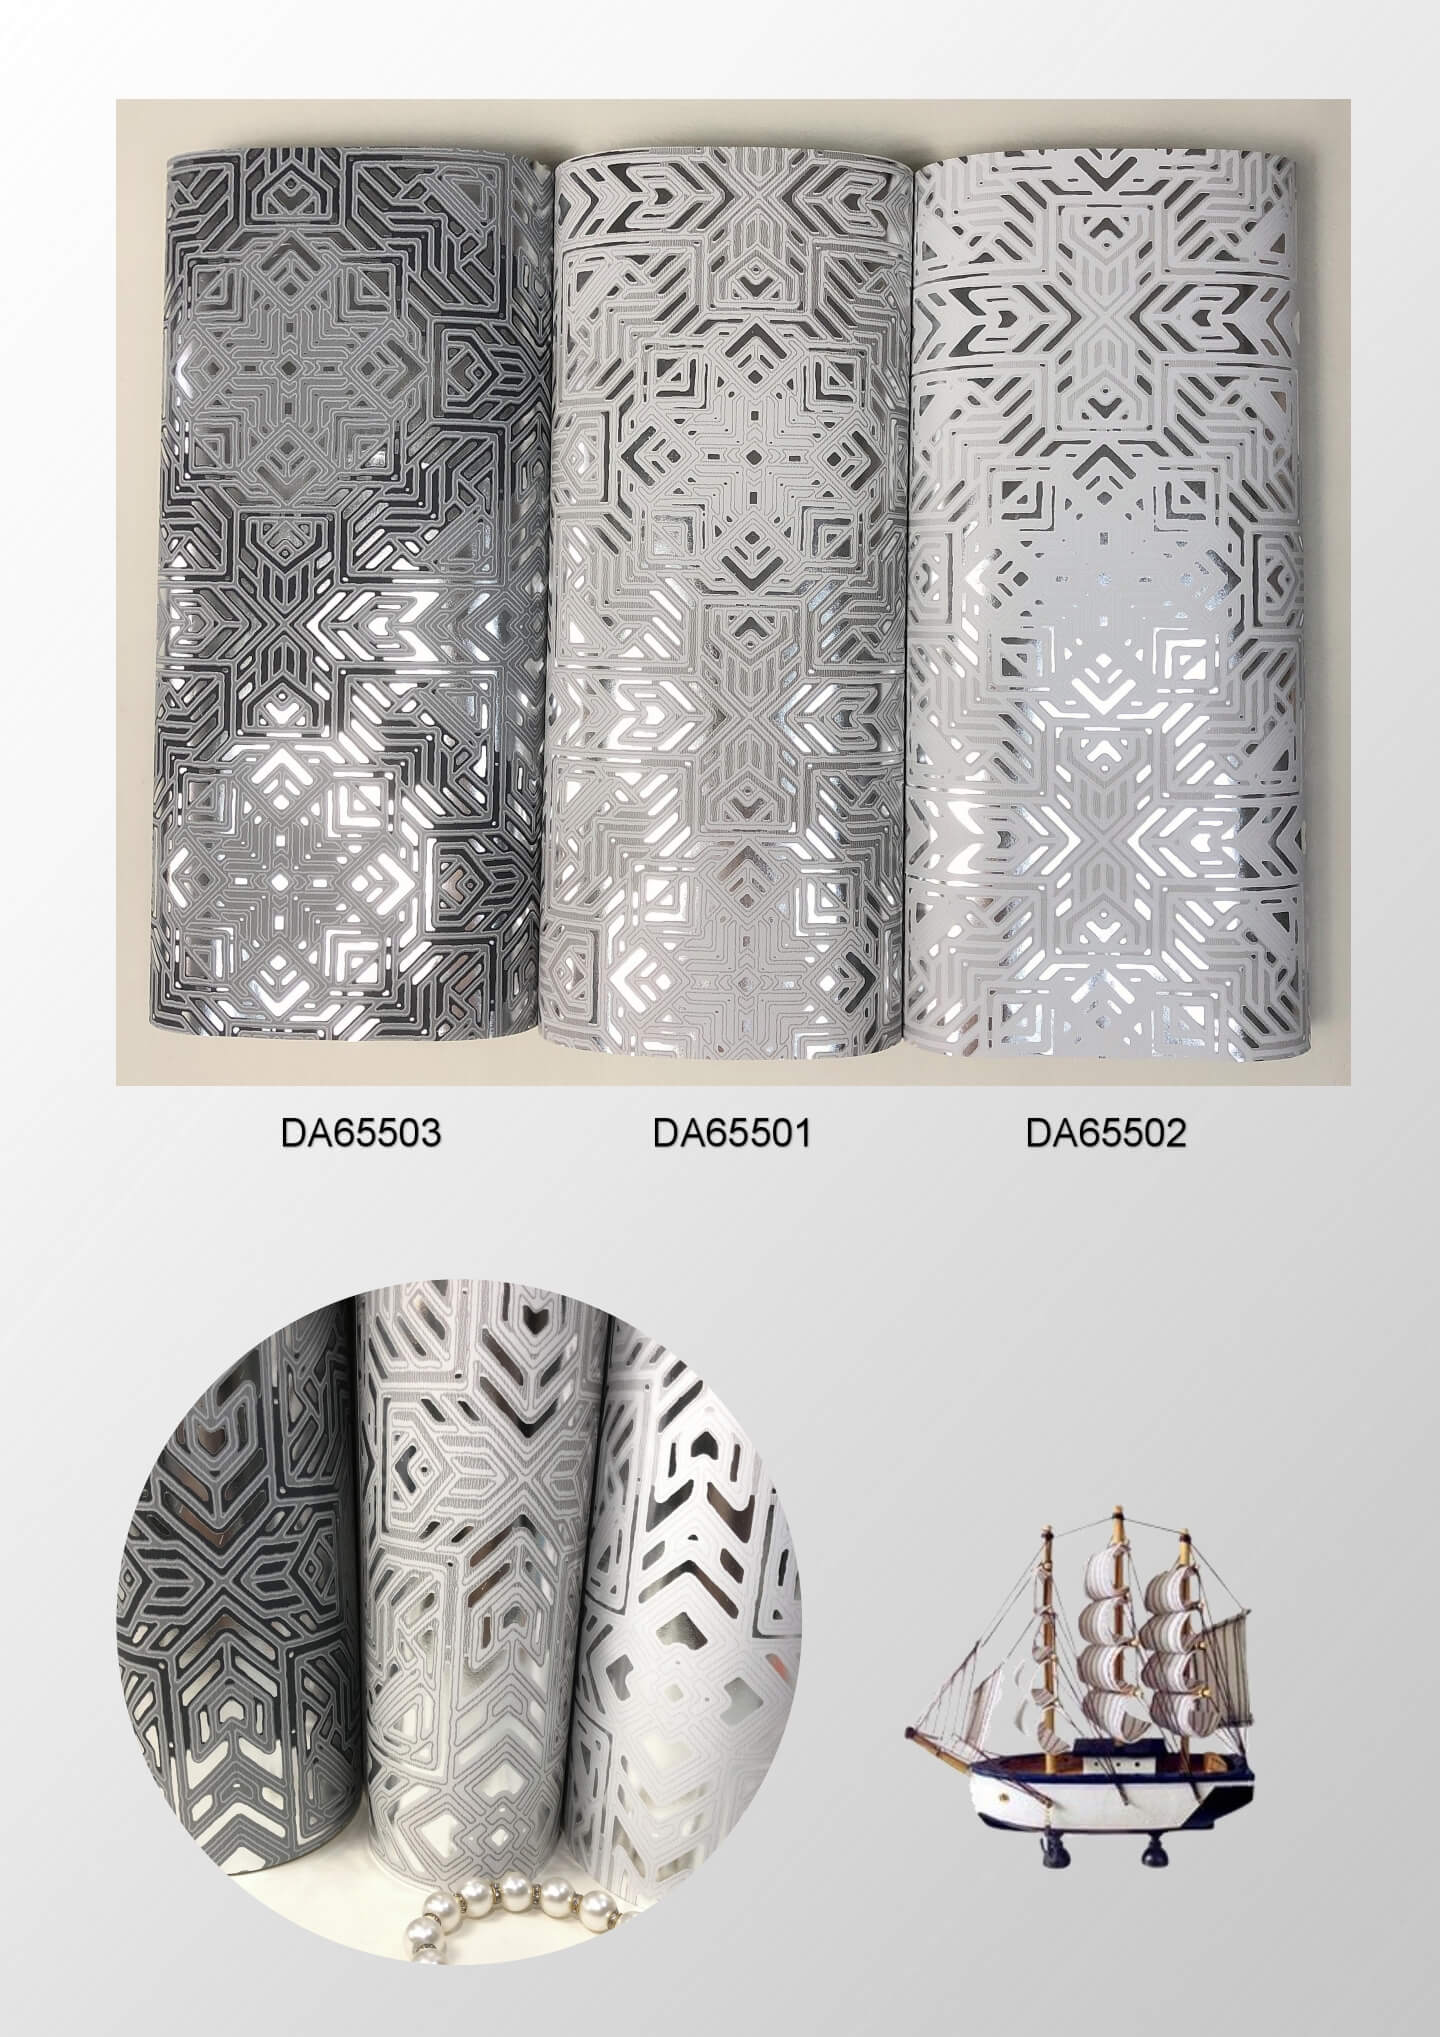 3D Metallic Wallpaper Wallcoverings For Home Hotel Wall Decoration (6)